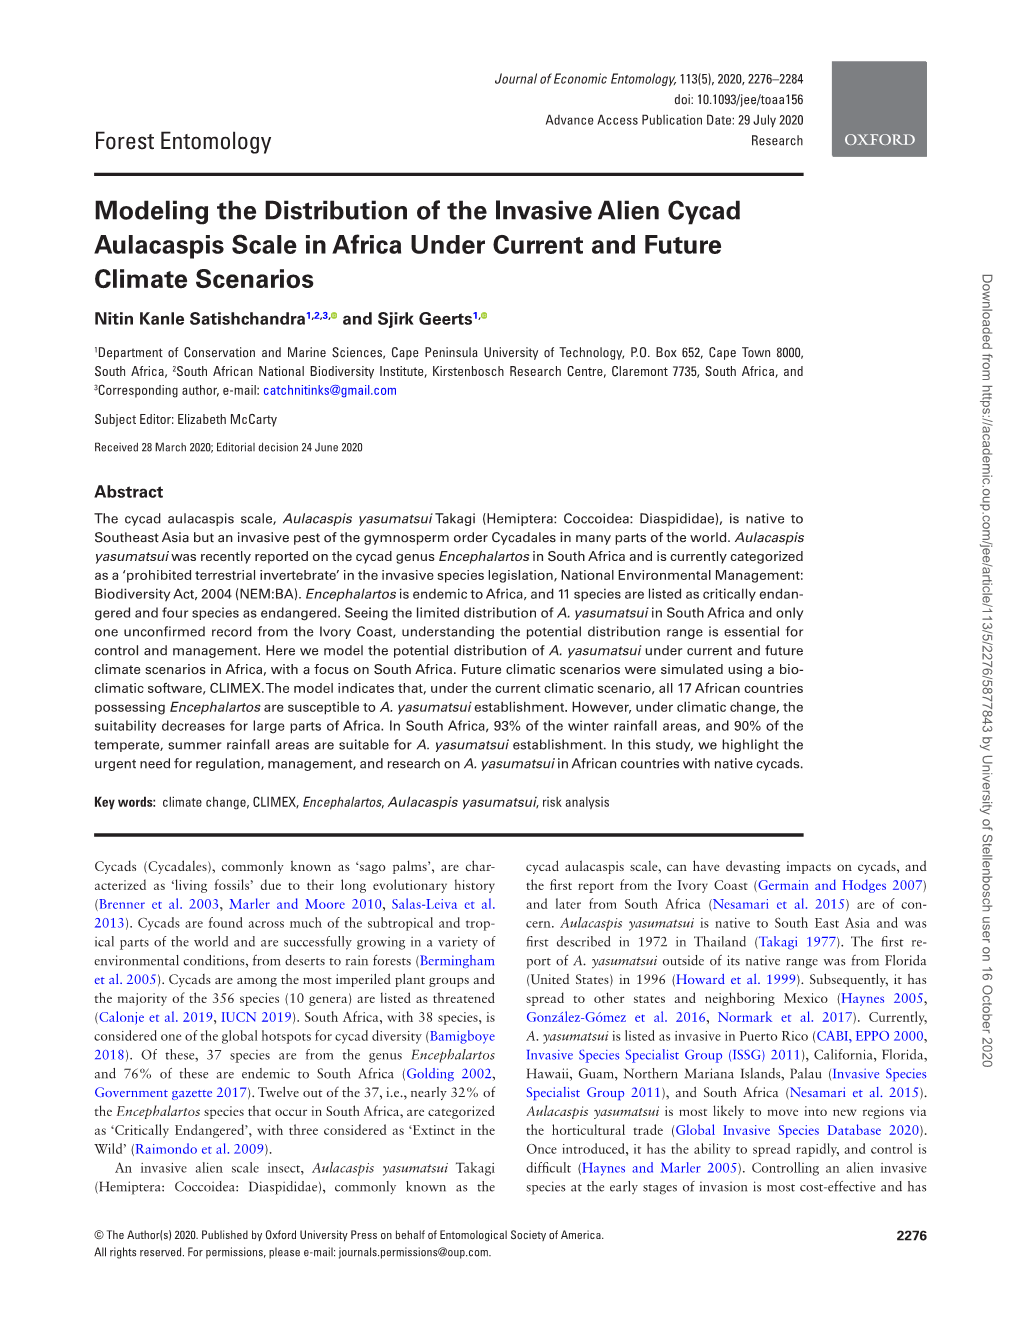 Modeling the Distribution of the Invasive Alien Cycad Aulacaspis